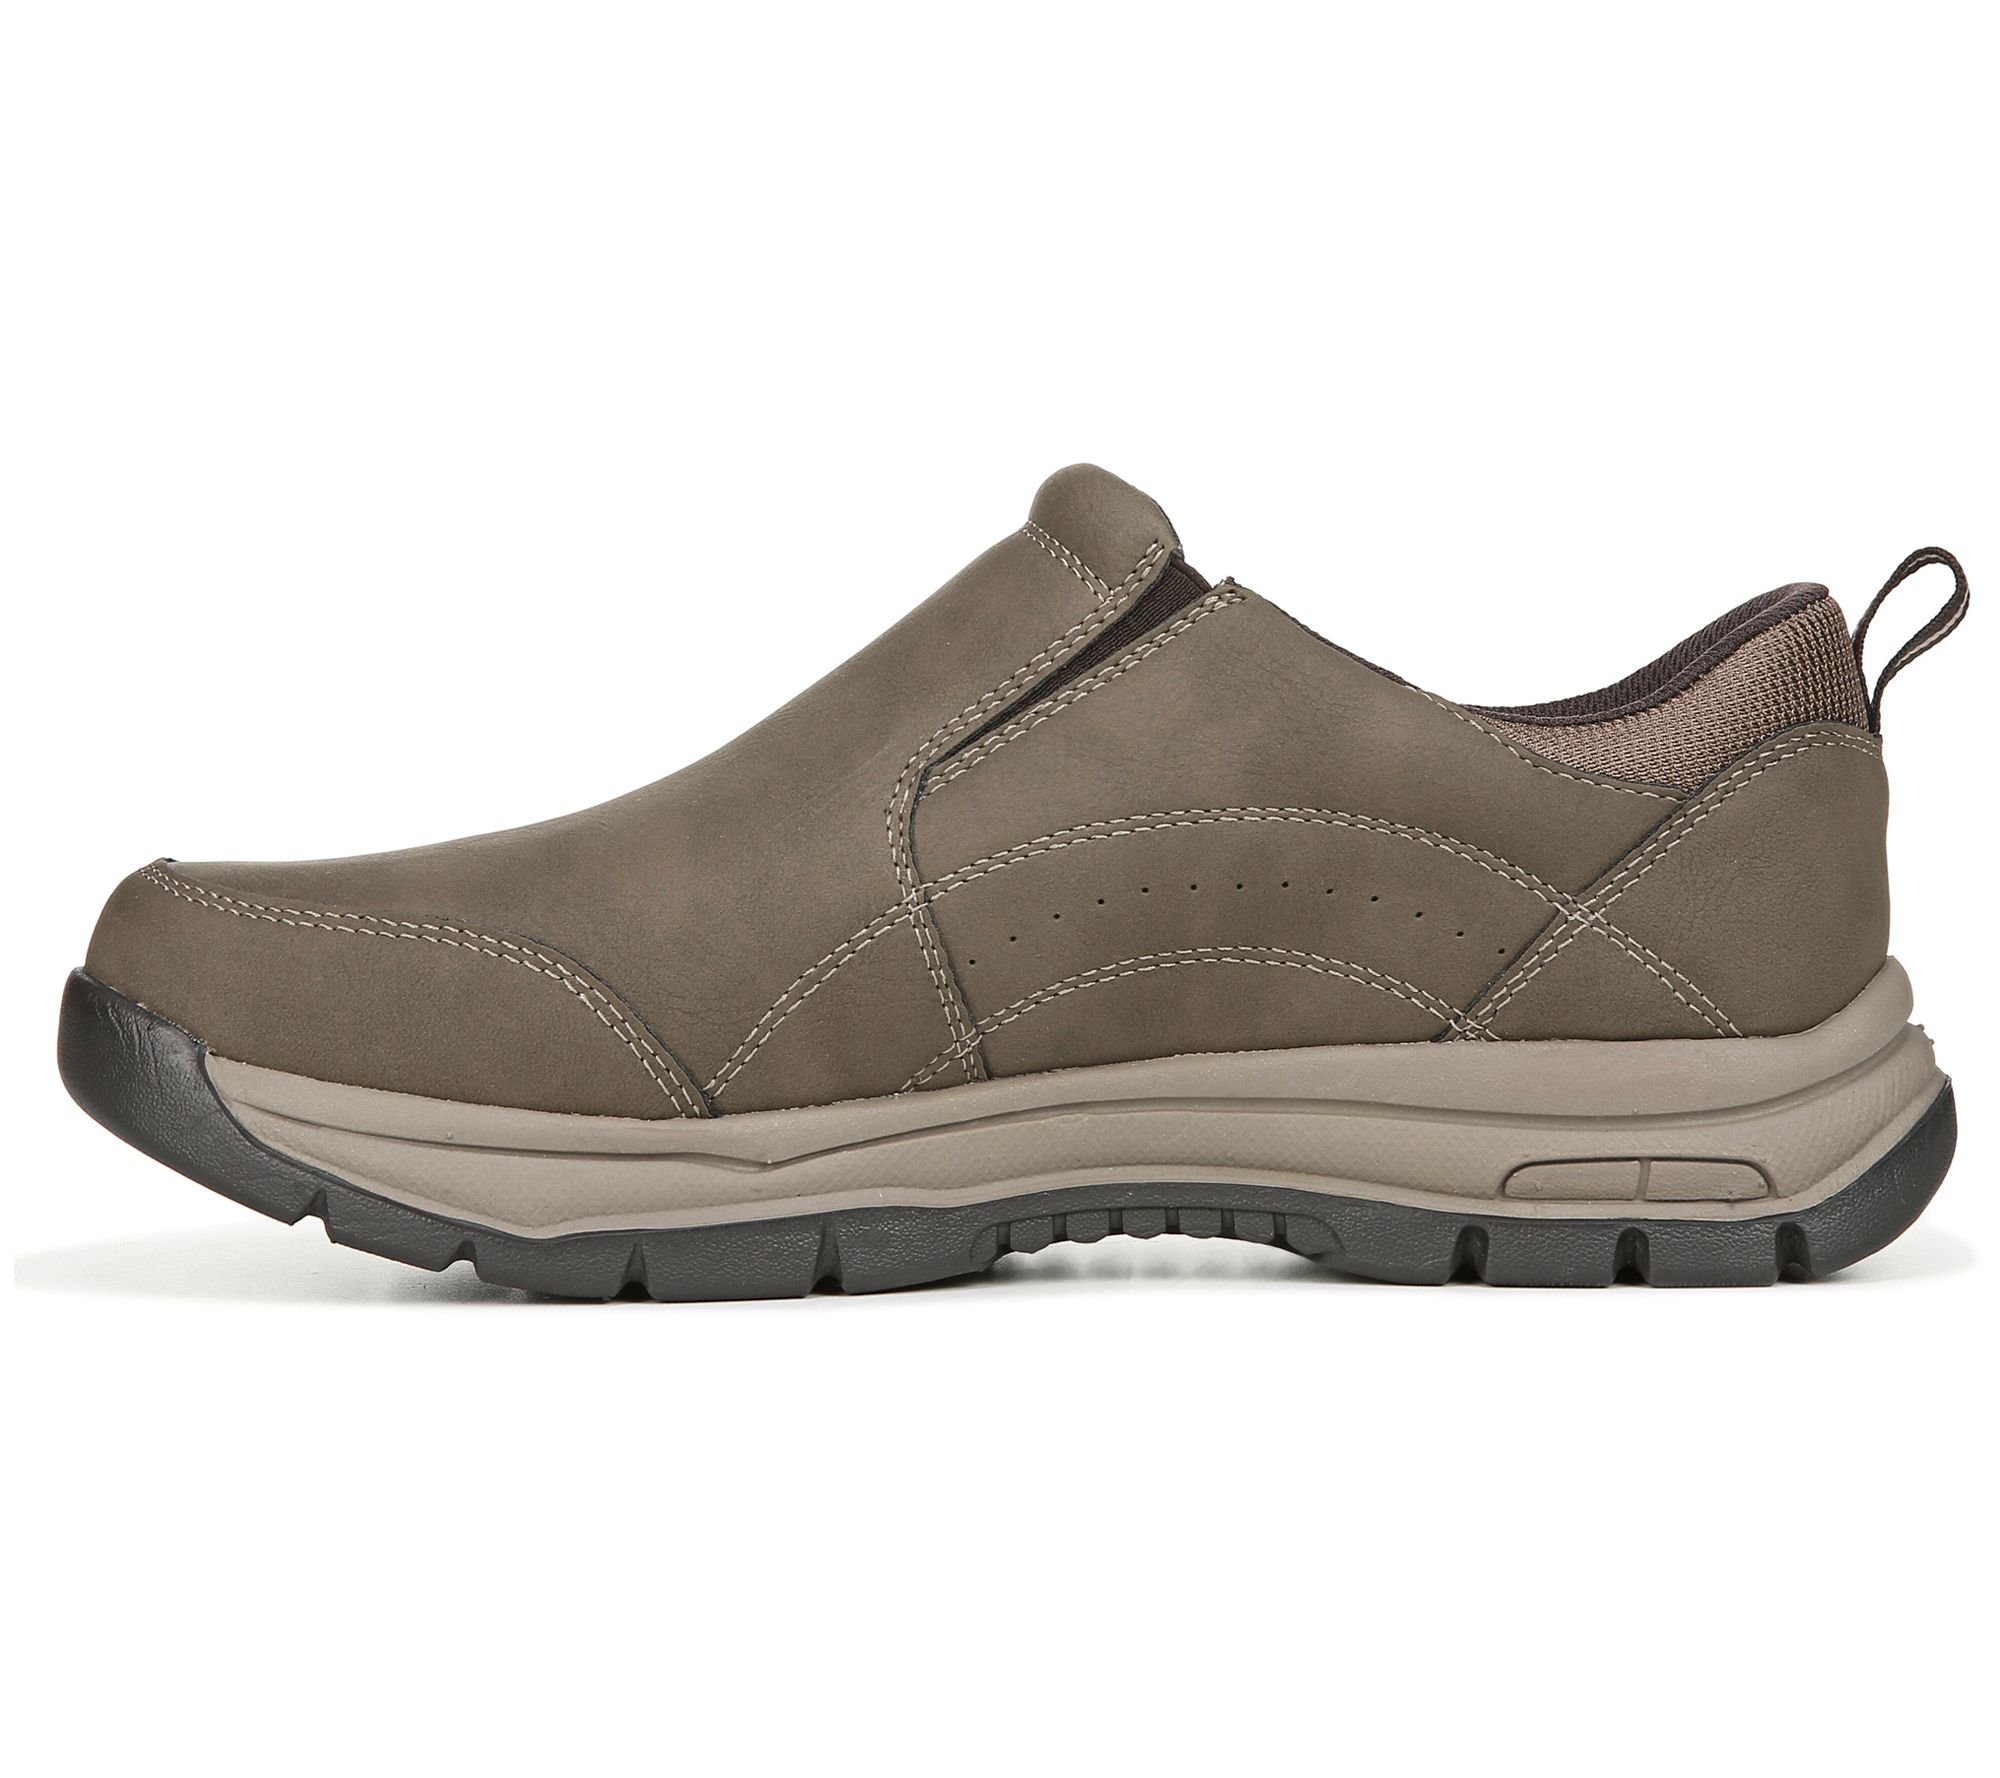 Dr. Scholl's Men's Slip-On Loafers - Vail - QVC.com